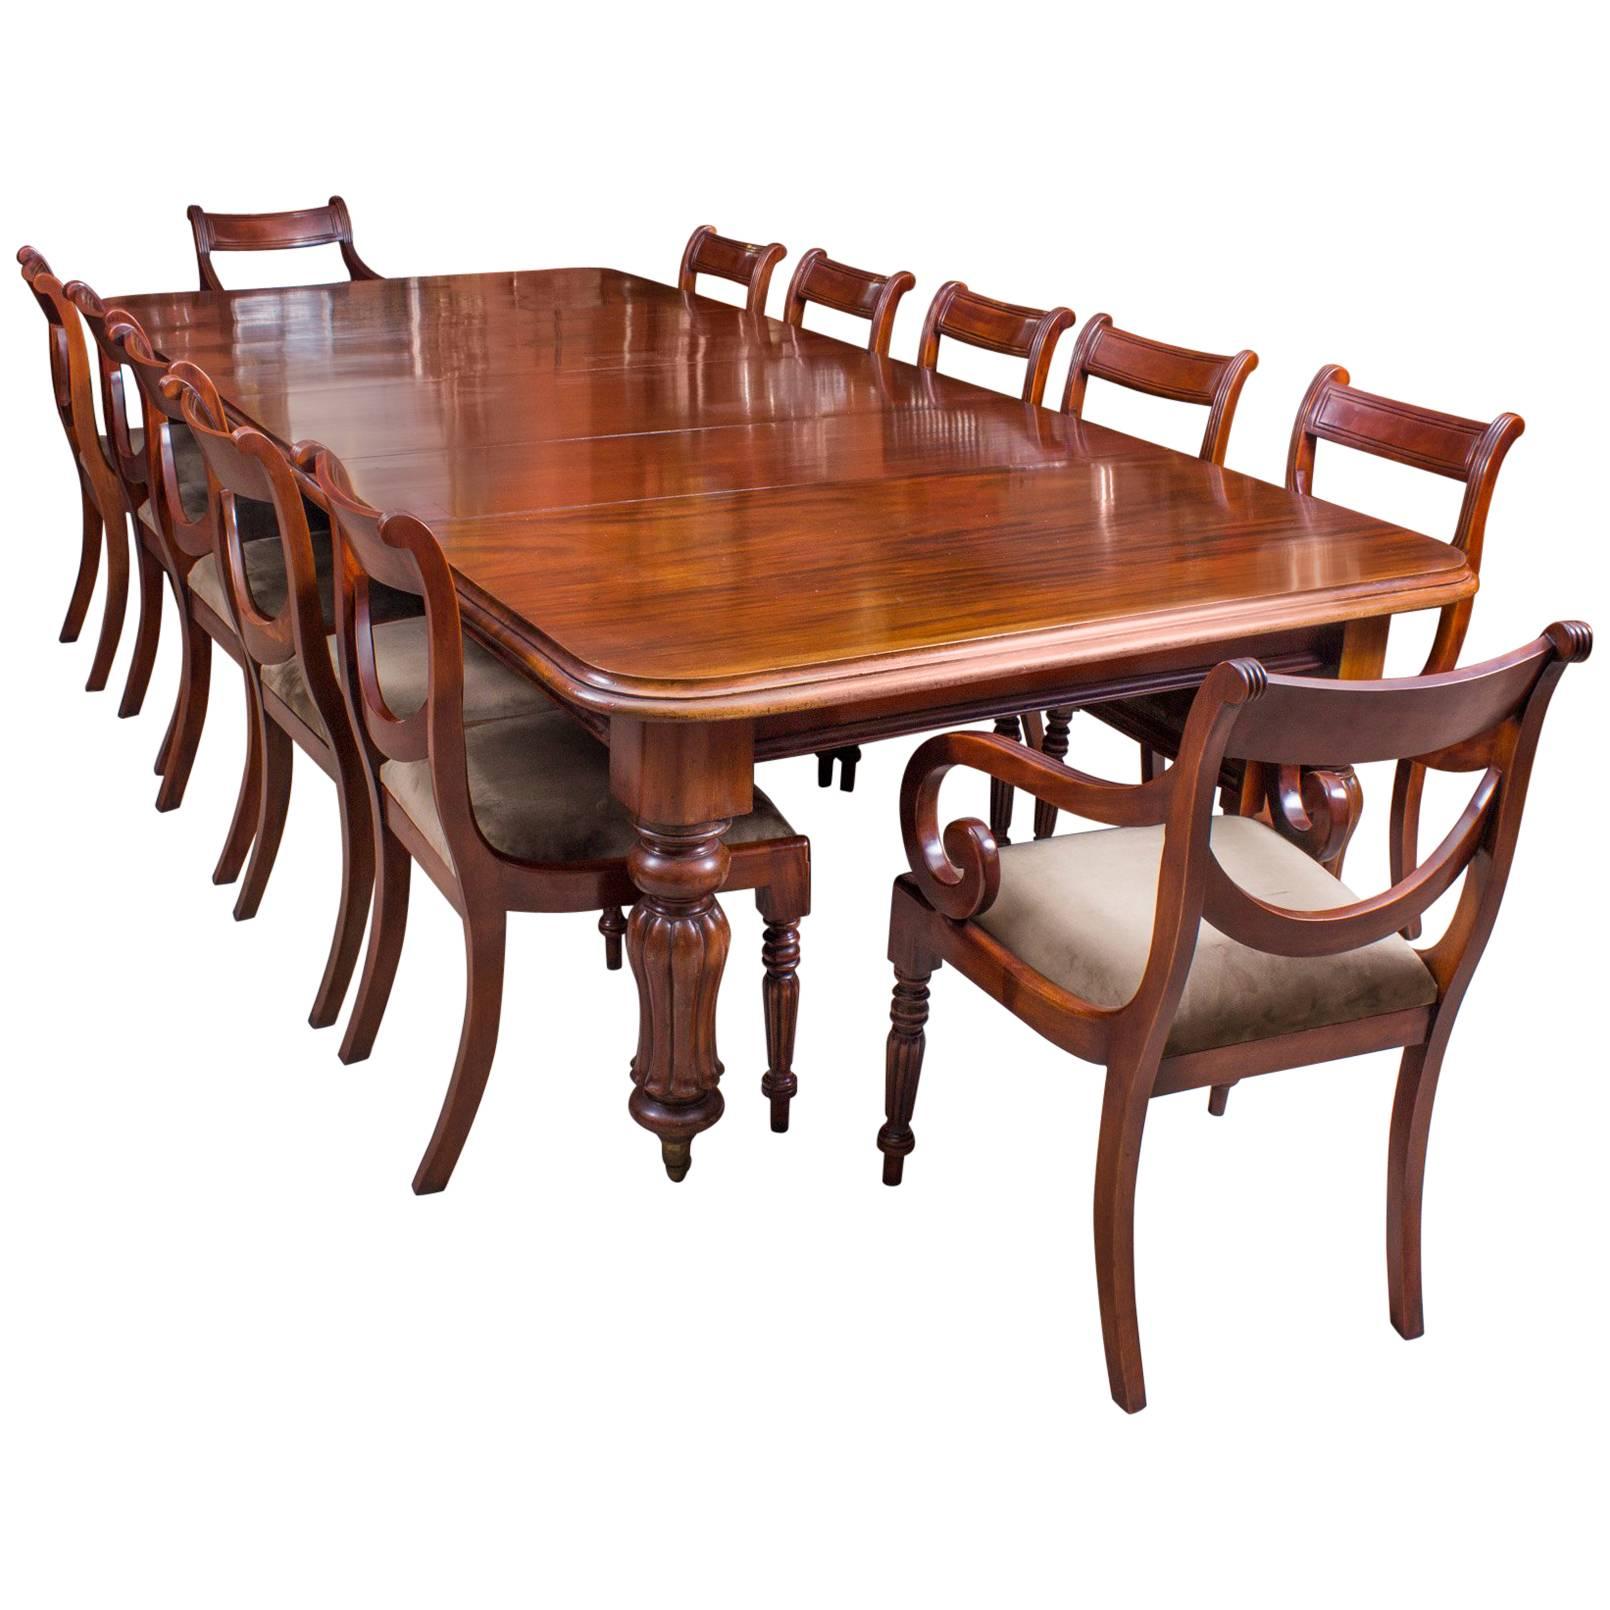 19th Century William IV Mahogany Dining Table & 12 swag Back Dining Chairs